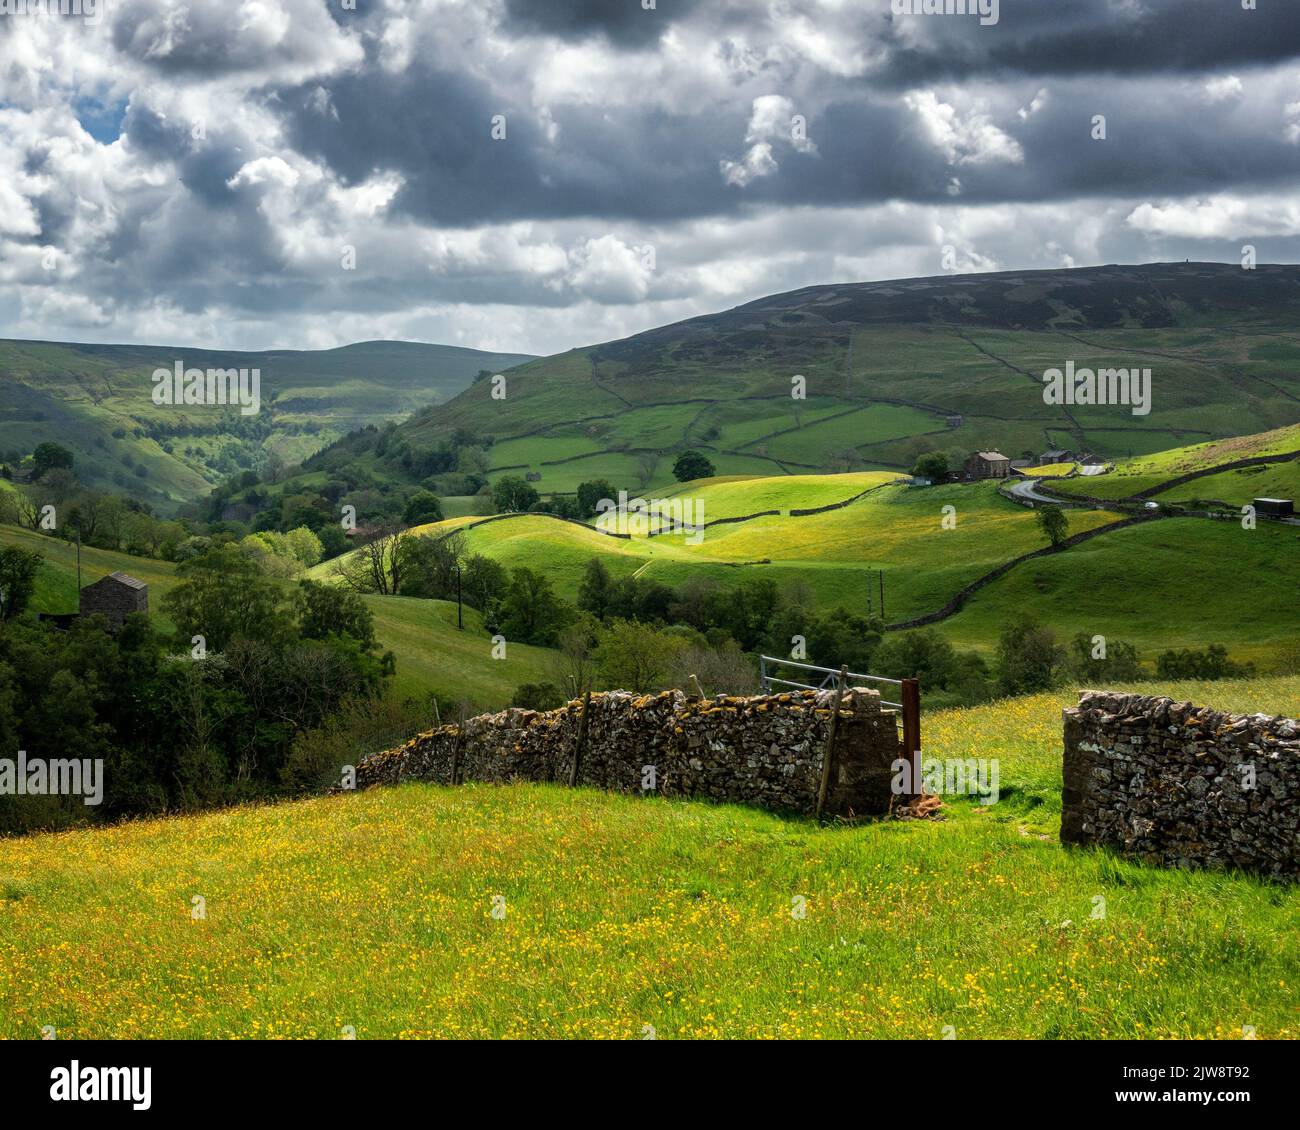 Stunning view of sunlit Swaledale, buttercup meadows and rolling hills with old drystone wall and barns. Yorkshire Dales National Park, England, UK Stock Photo